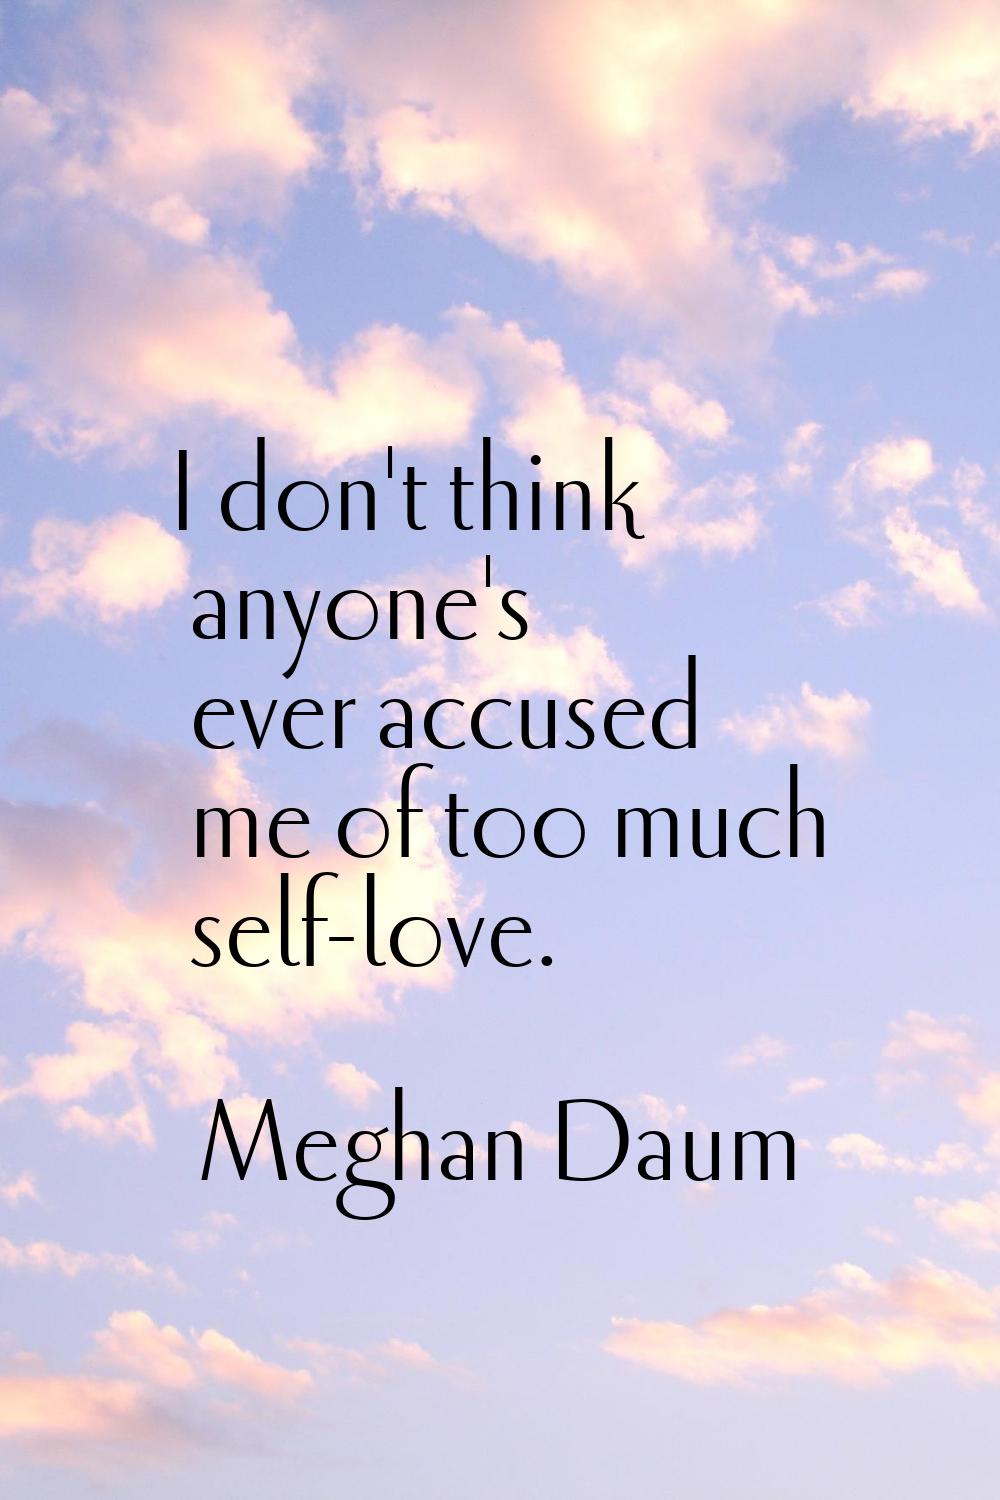 I don't think anyone's ever accused me of too much self-love.